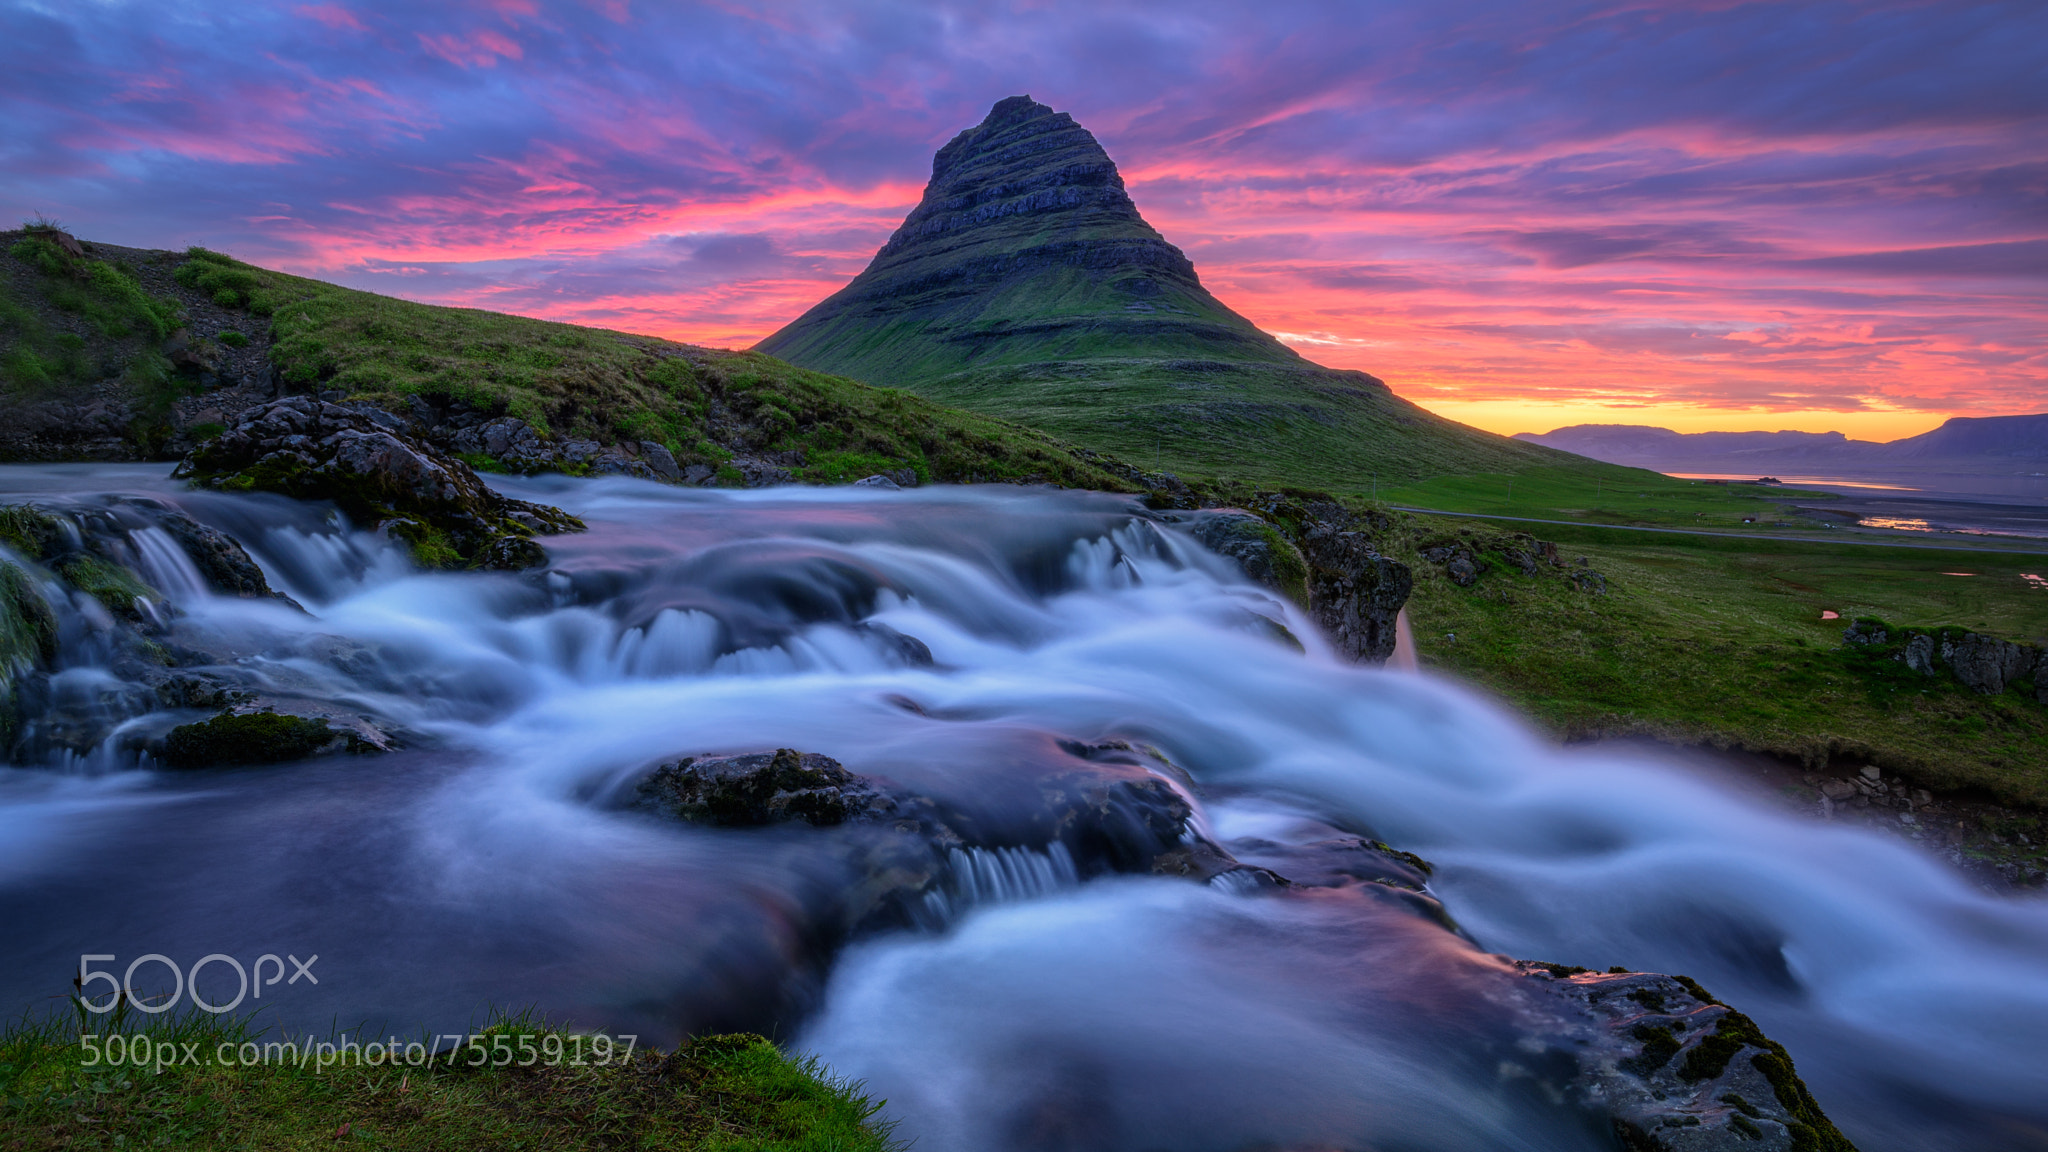 "Magical Kirkjufell, Iceland" - sunset on one of Iceland's most